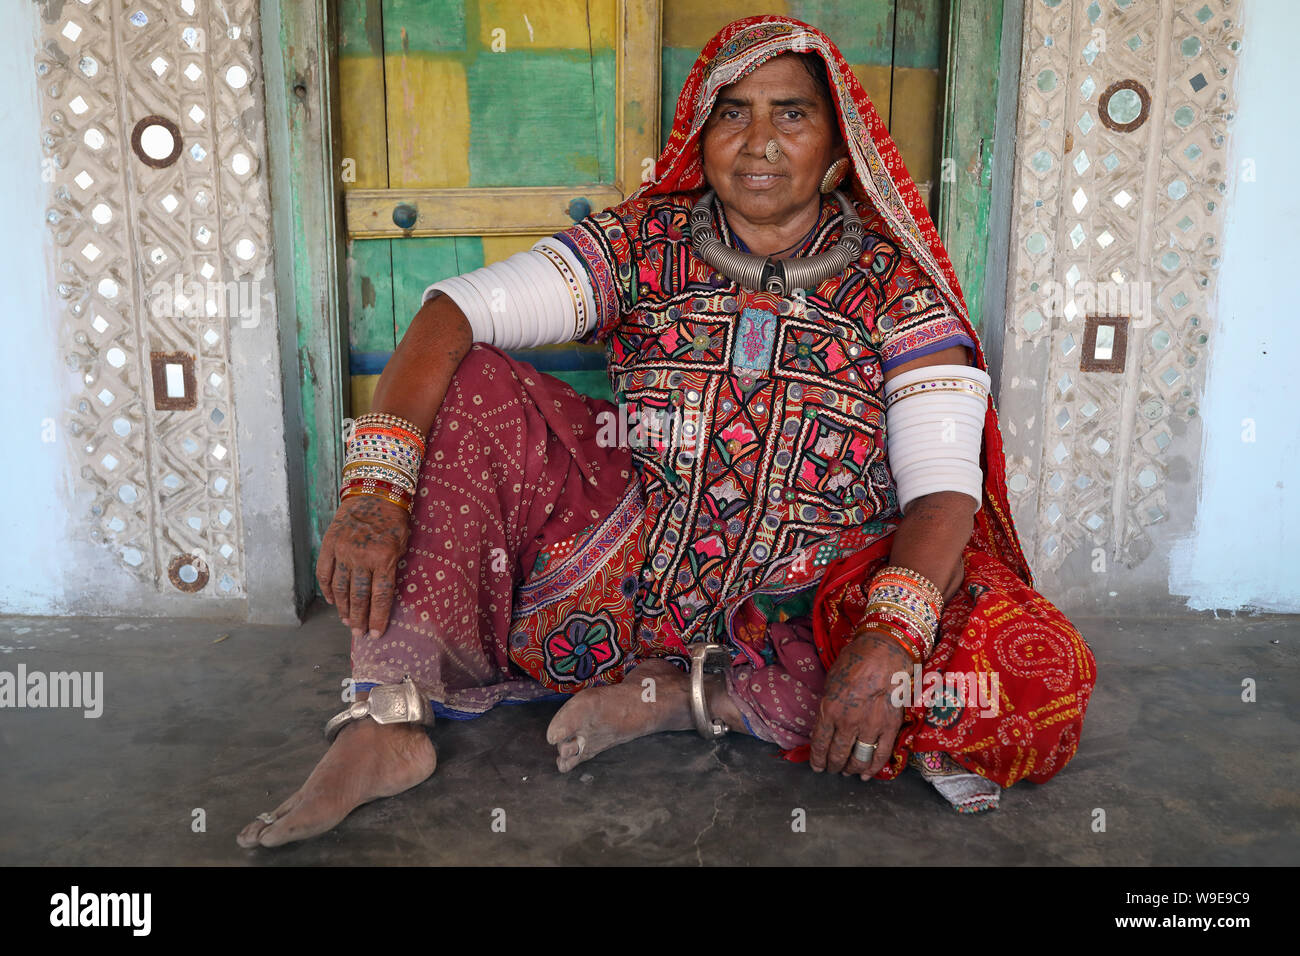 Tribal woman in a rural village in the district of Kutch, Gujarat. The Kutch region is well known for its tribal life and traditional culture. Stock Photo